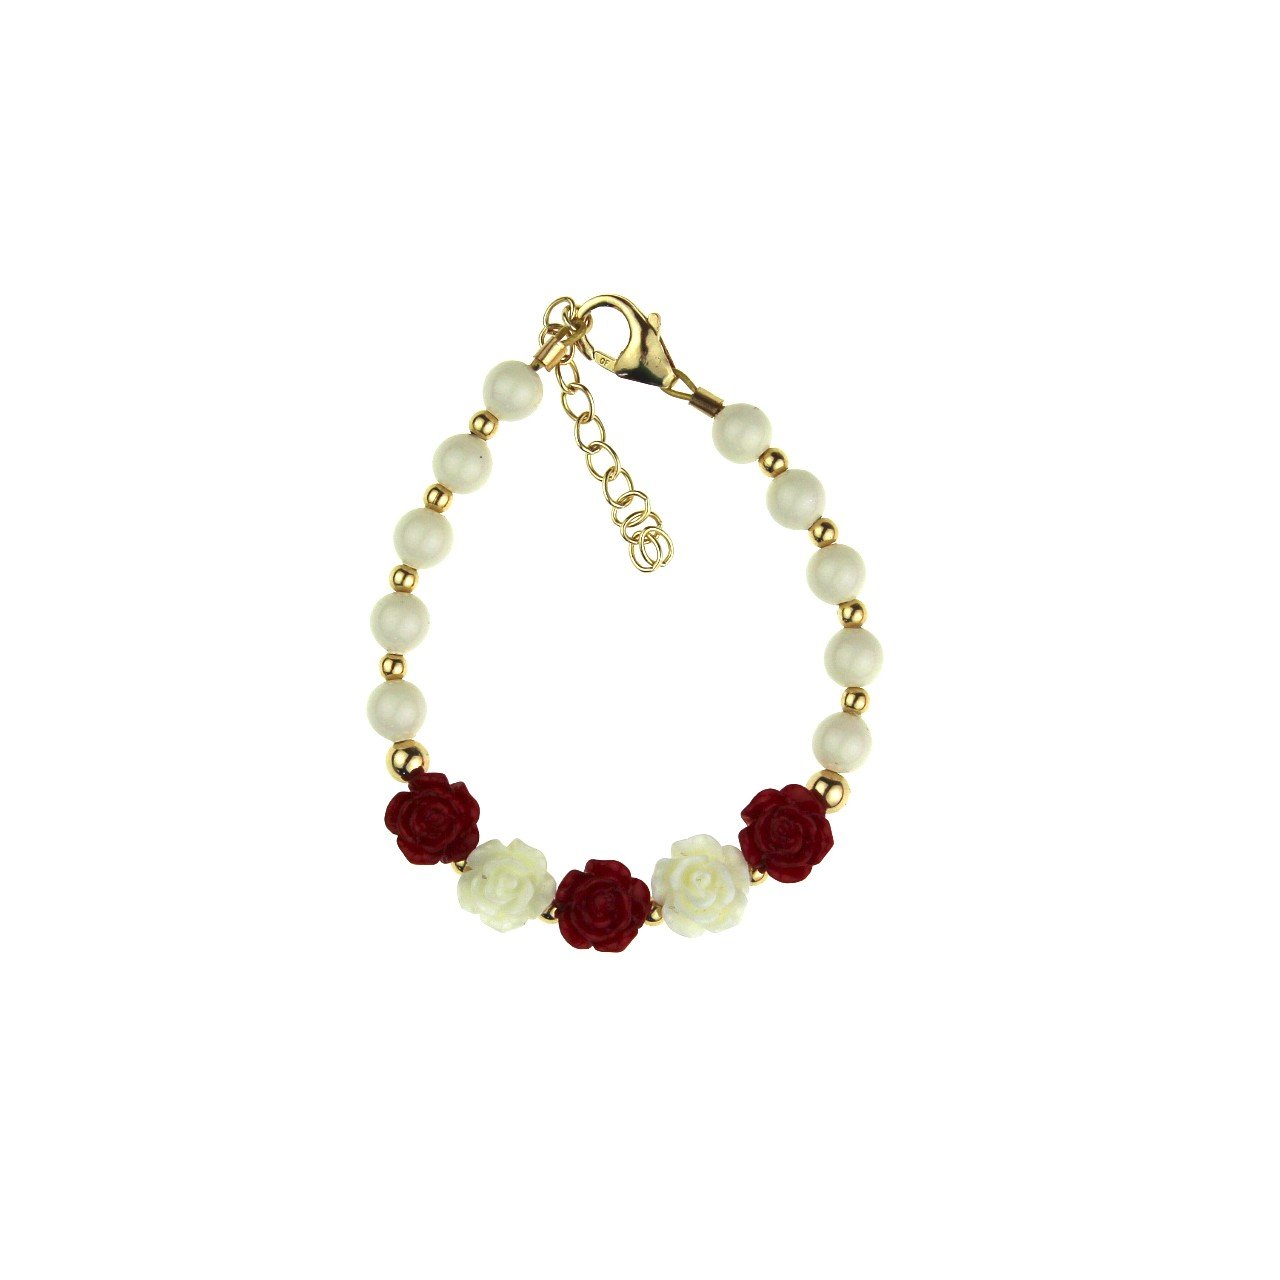 Crystal Dream Elegant 14KT Gold-Filled Beads Luxury Baby Girl Bracelet Made with White European Simulated Pearls and Red Flowers (B100-CFRW)